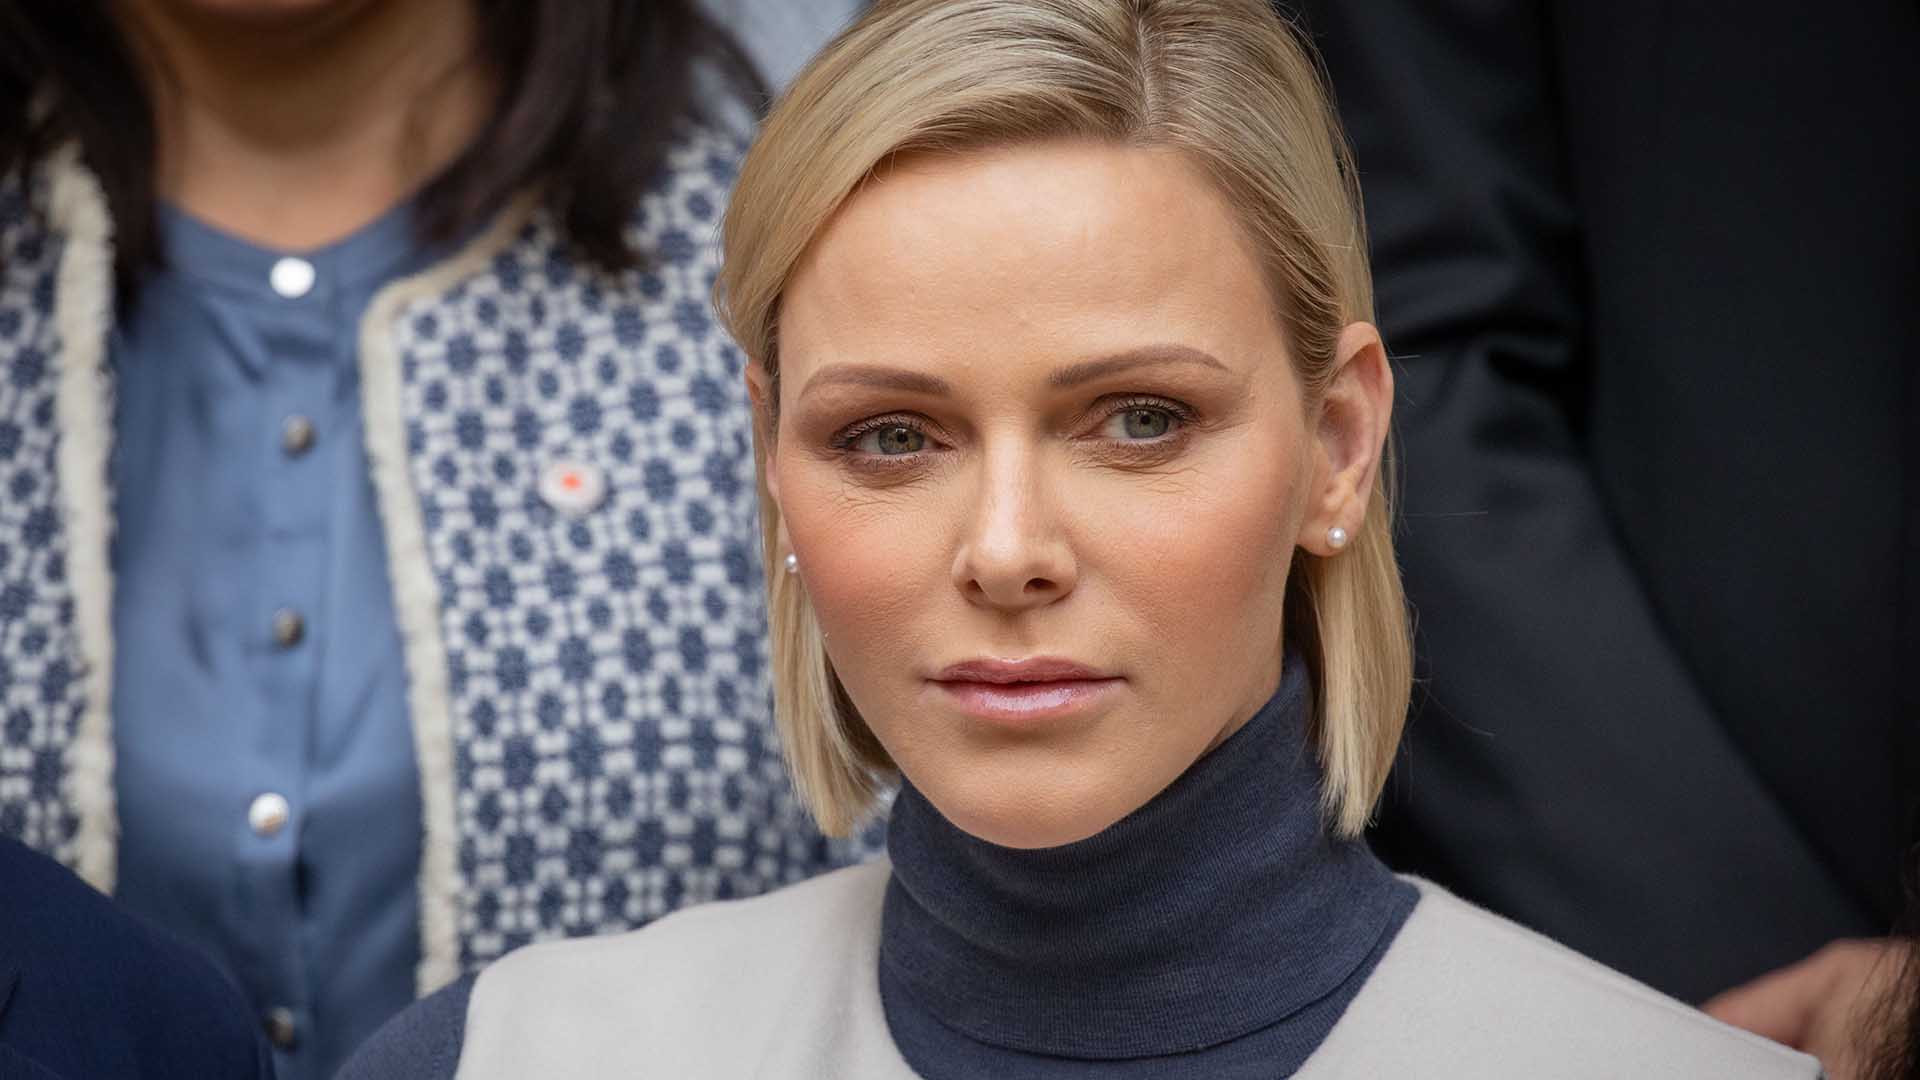 Princess Charlene of Monaco offer gifts to disadvantadged people at the Monaco Red Cross office, on November 15th 2019, as part of the Monaco National Day celebrations.